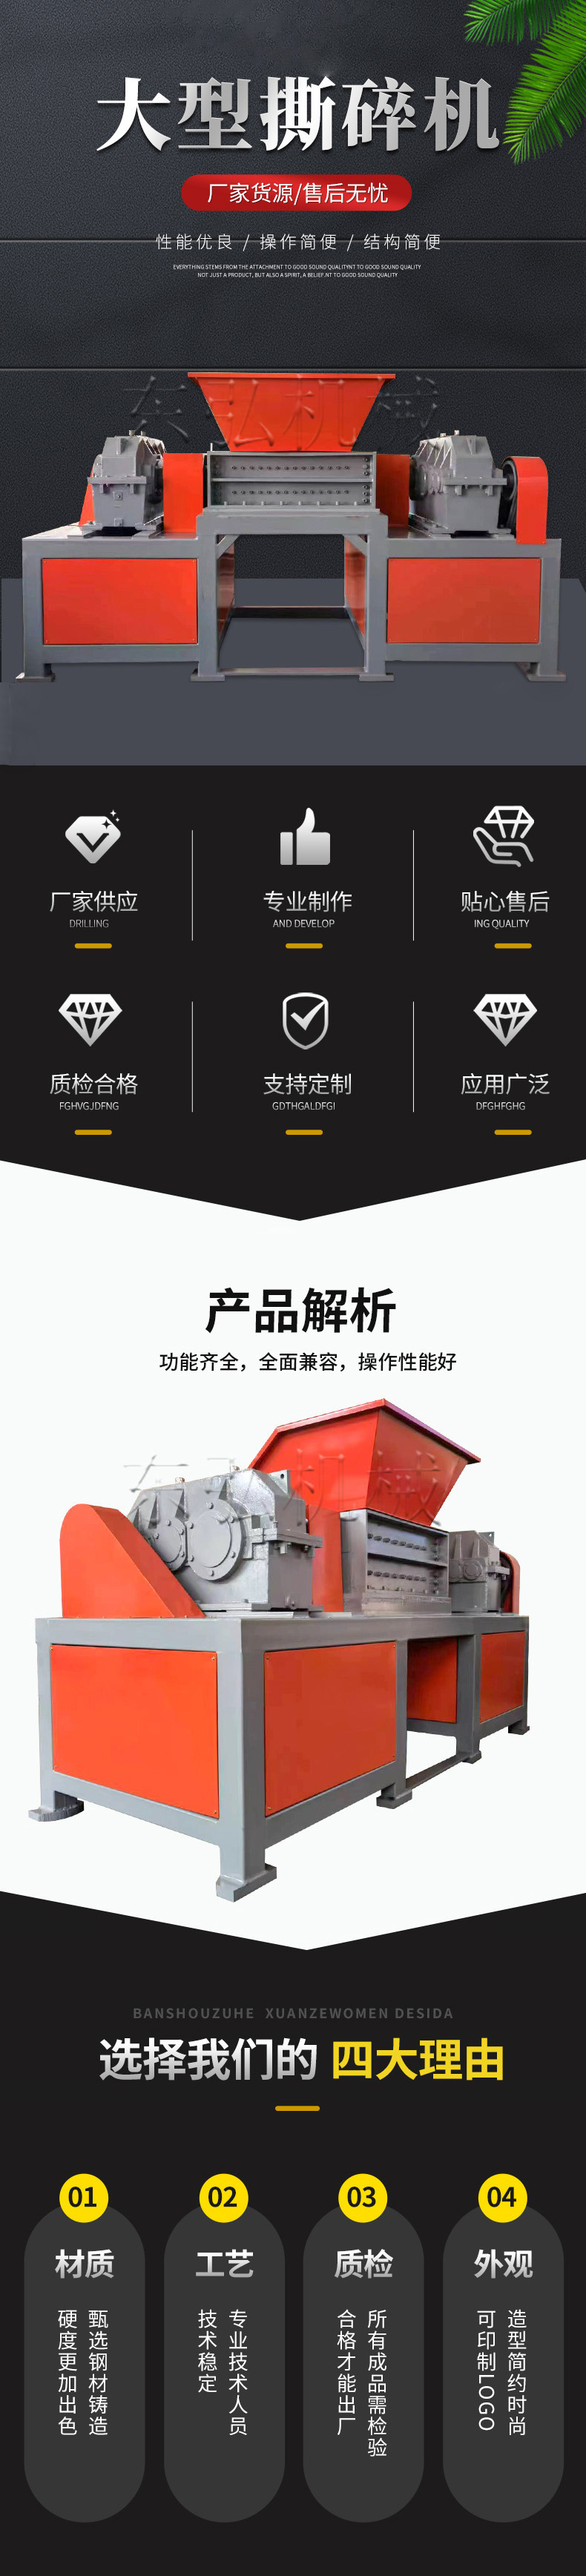 Dual axis shredder Donghong multifunctional shredding equipment with low noise and energy consumption JZL-1000